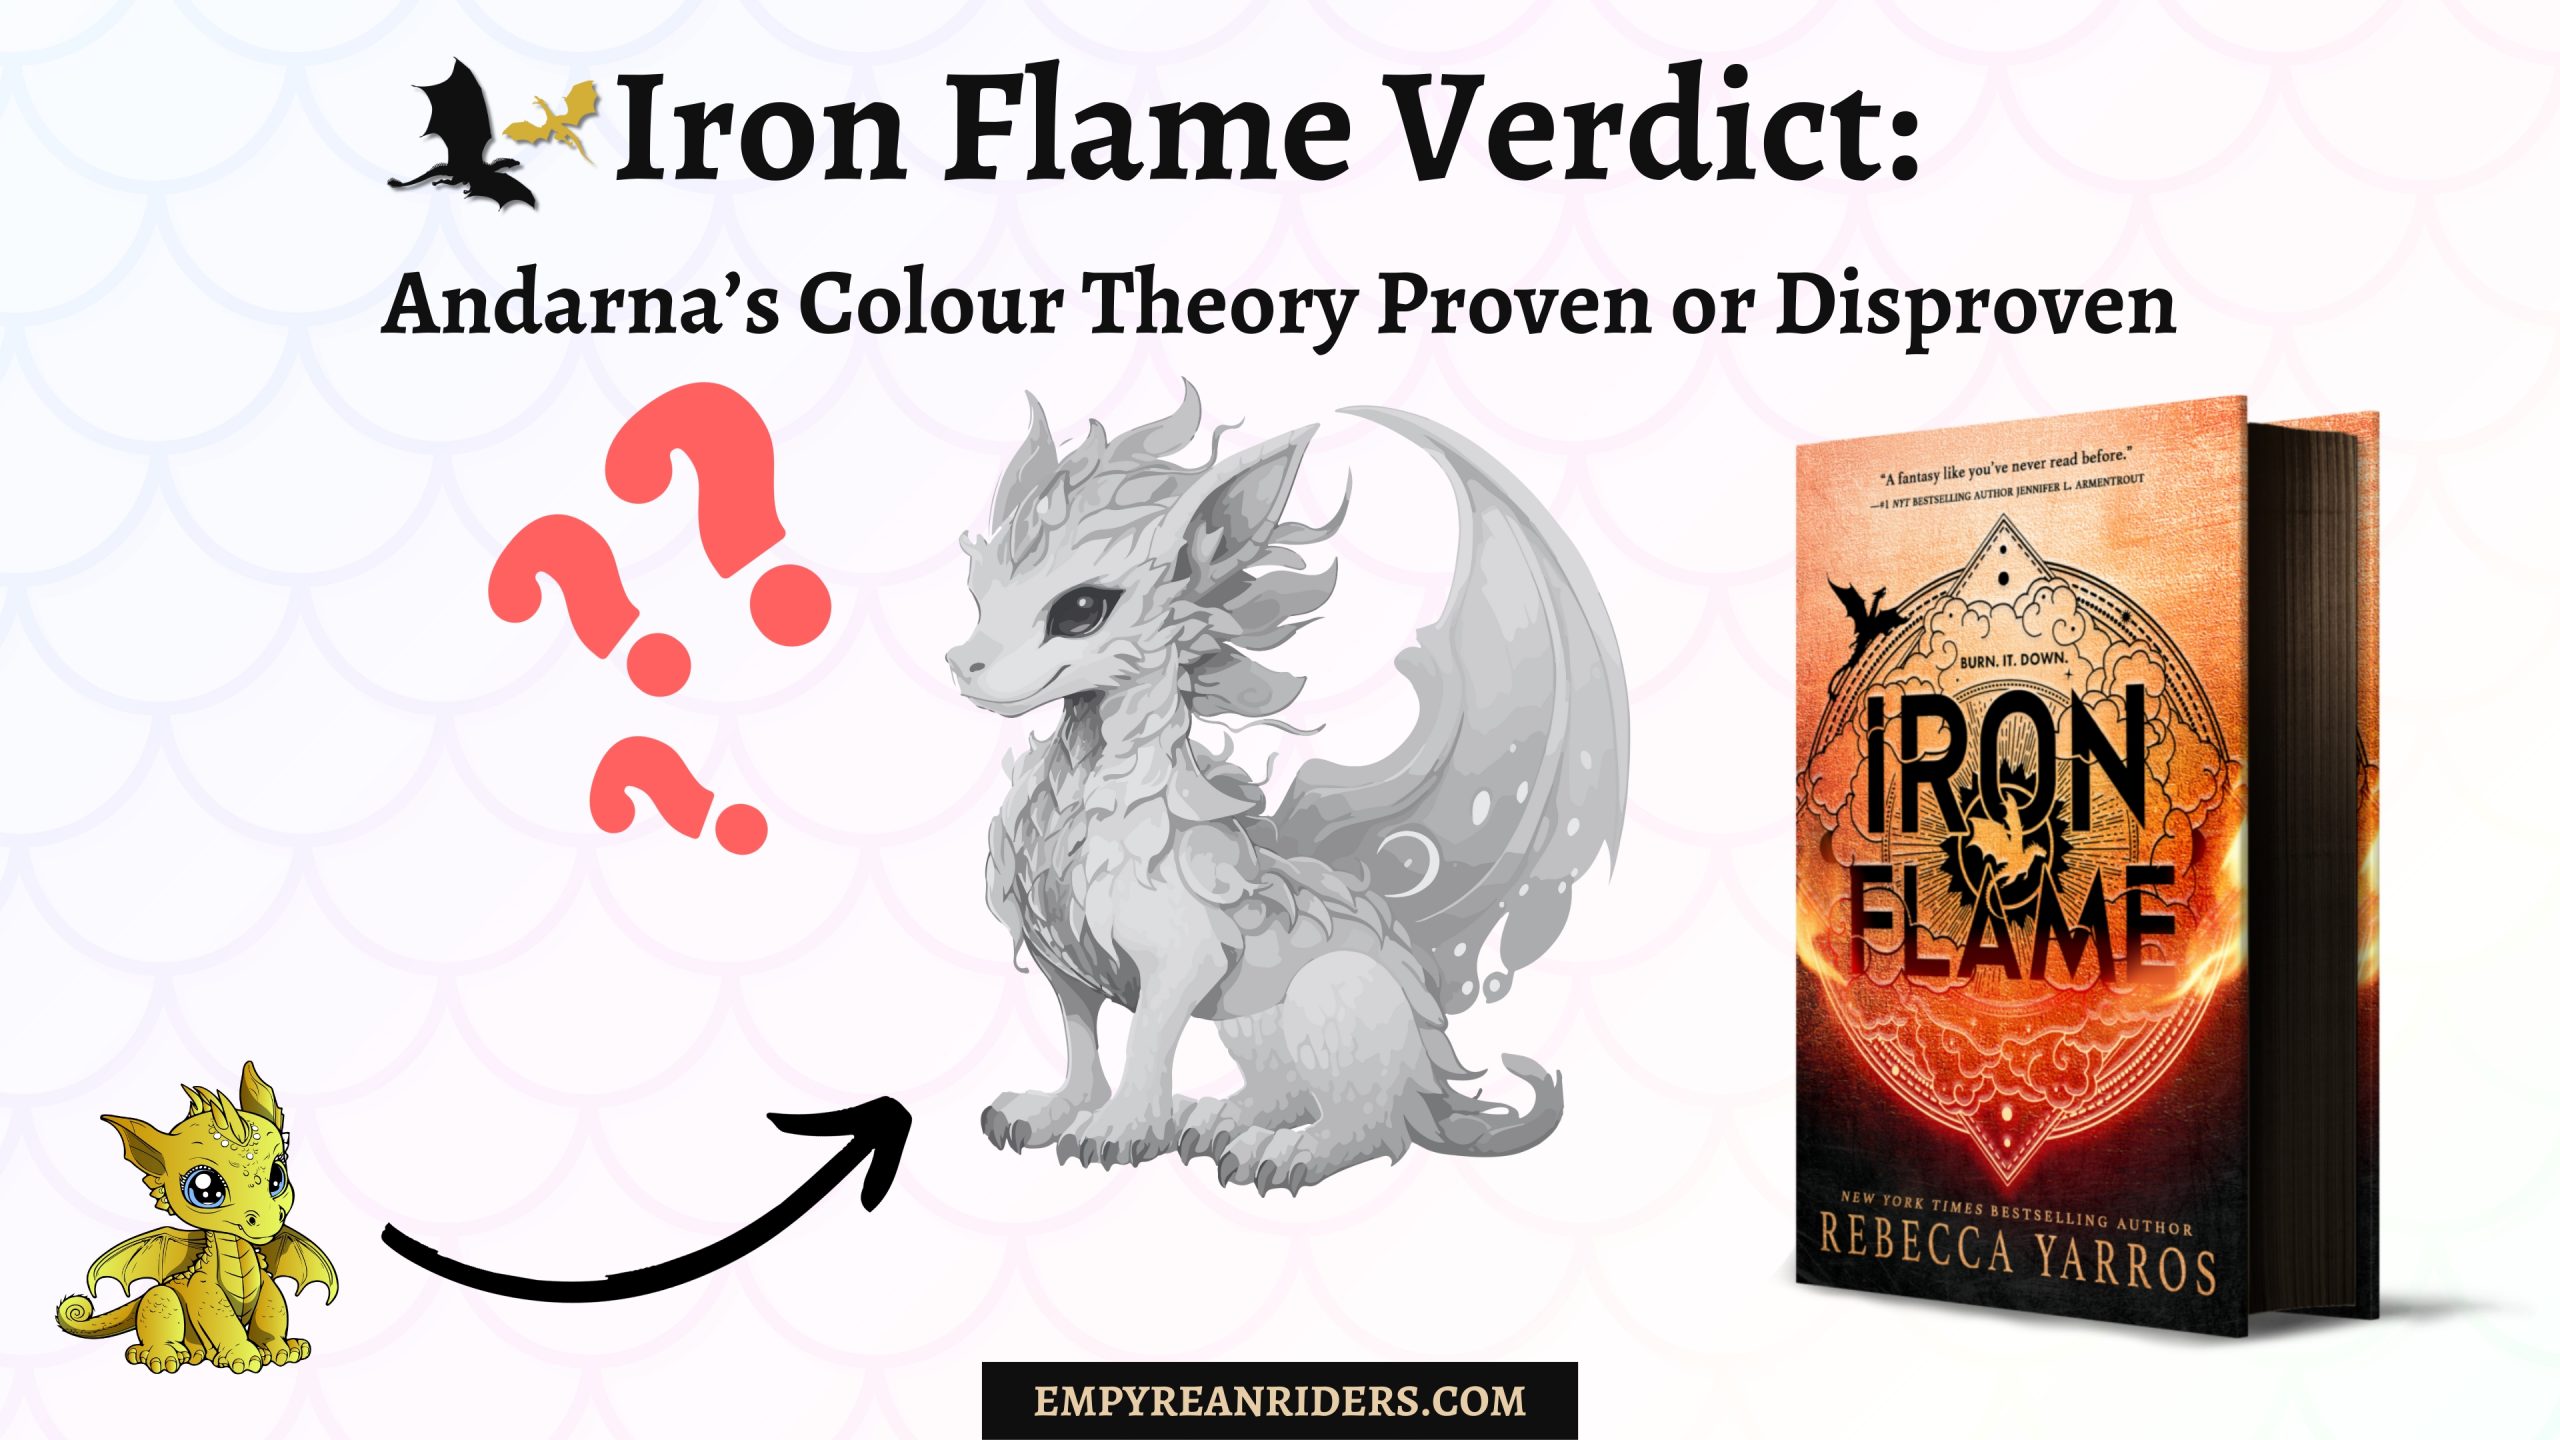 Iron Flame Verdict: Andarna’s colour Theory Proven or Disproven